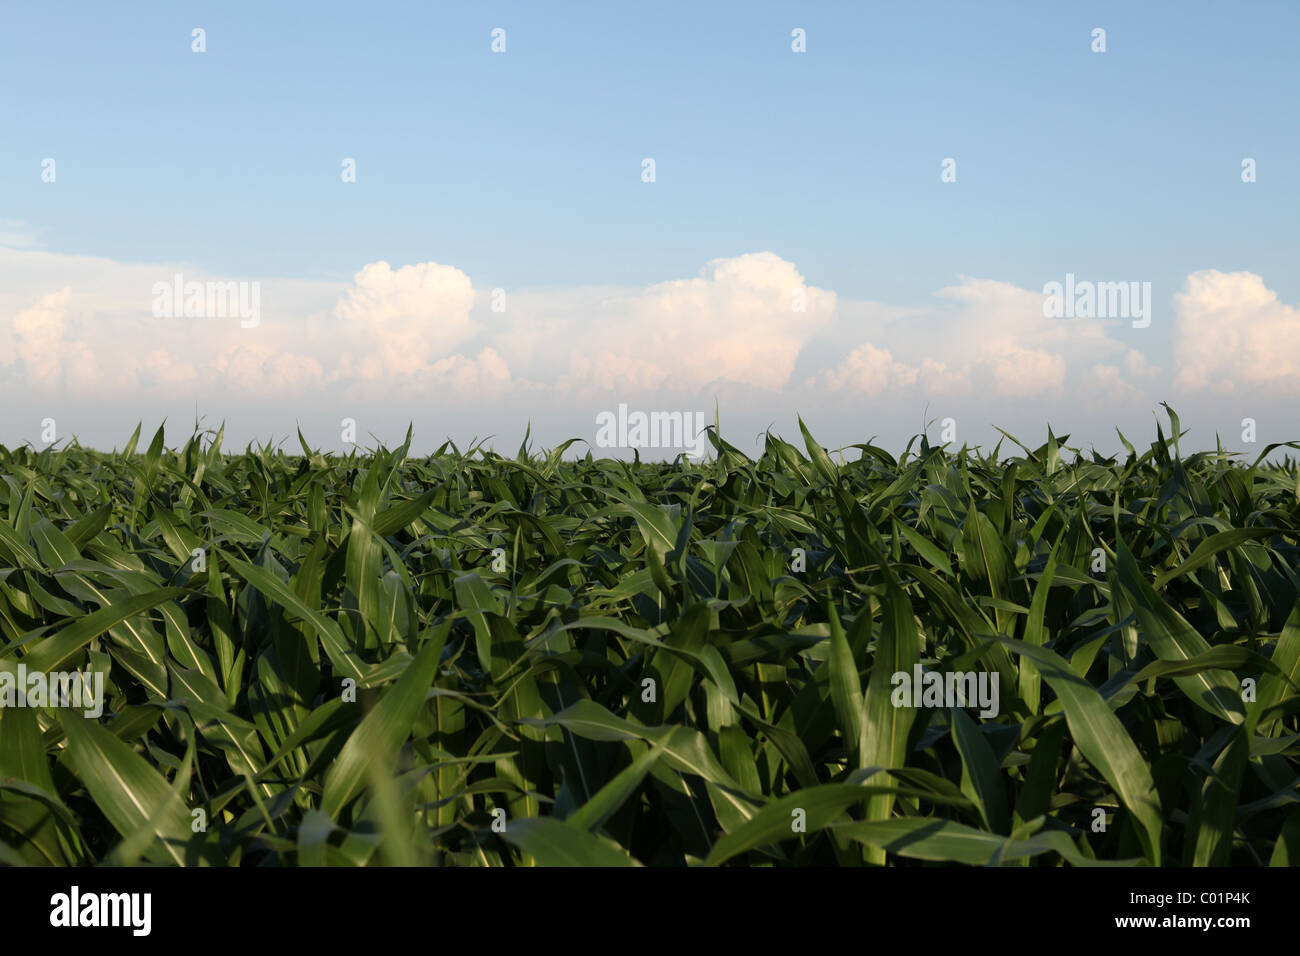 Tops of corn stalks on summer day in Iowa field with clouds in the sky. Stock Photo